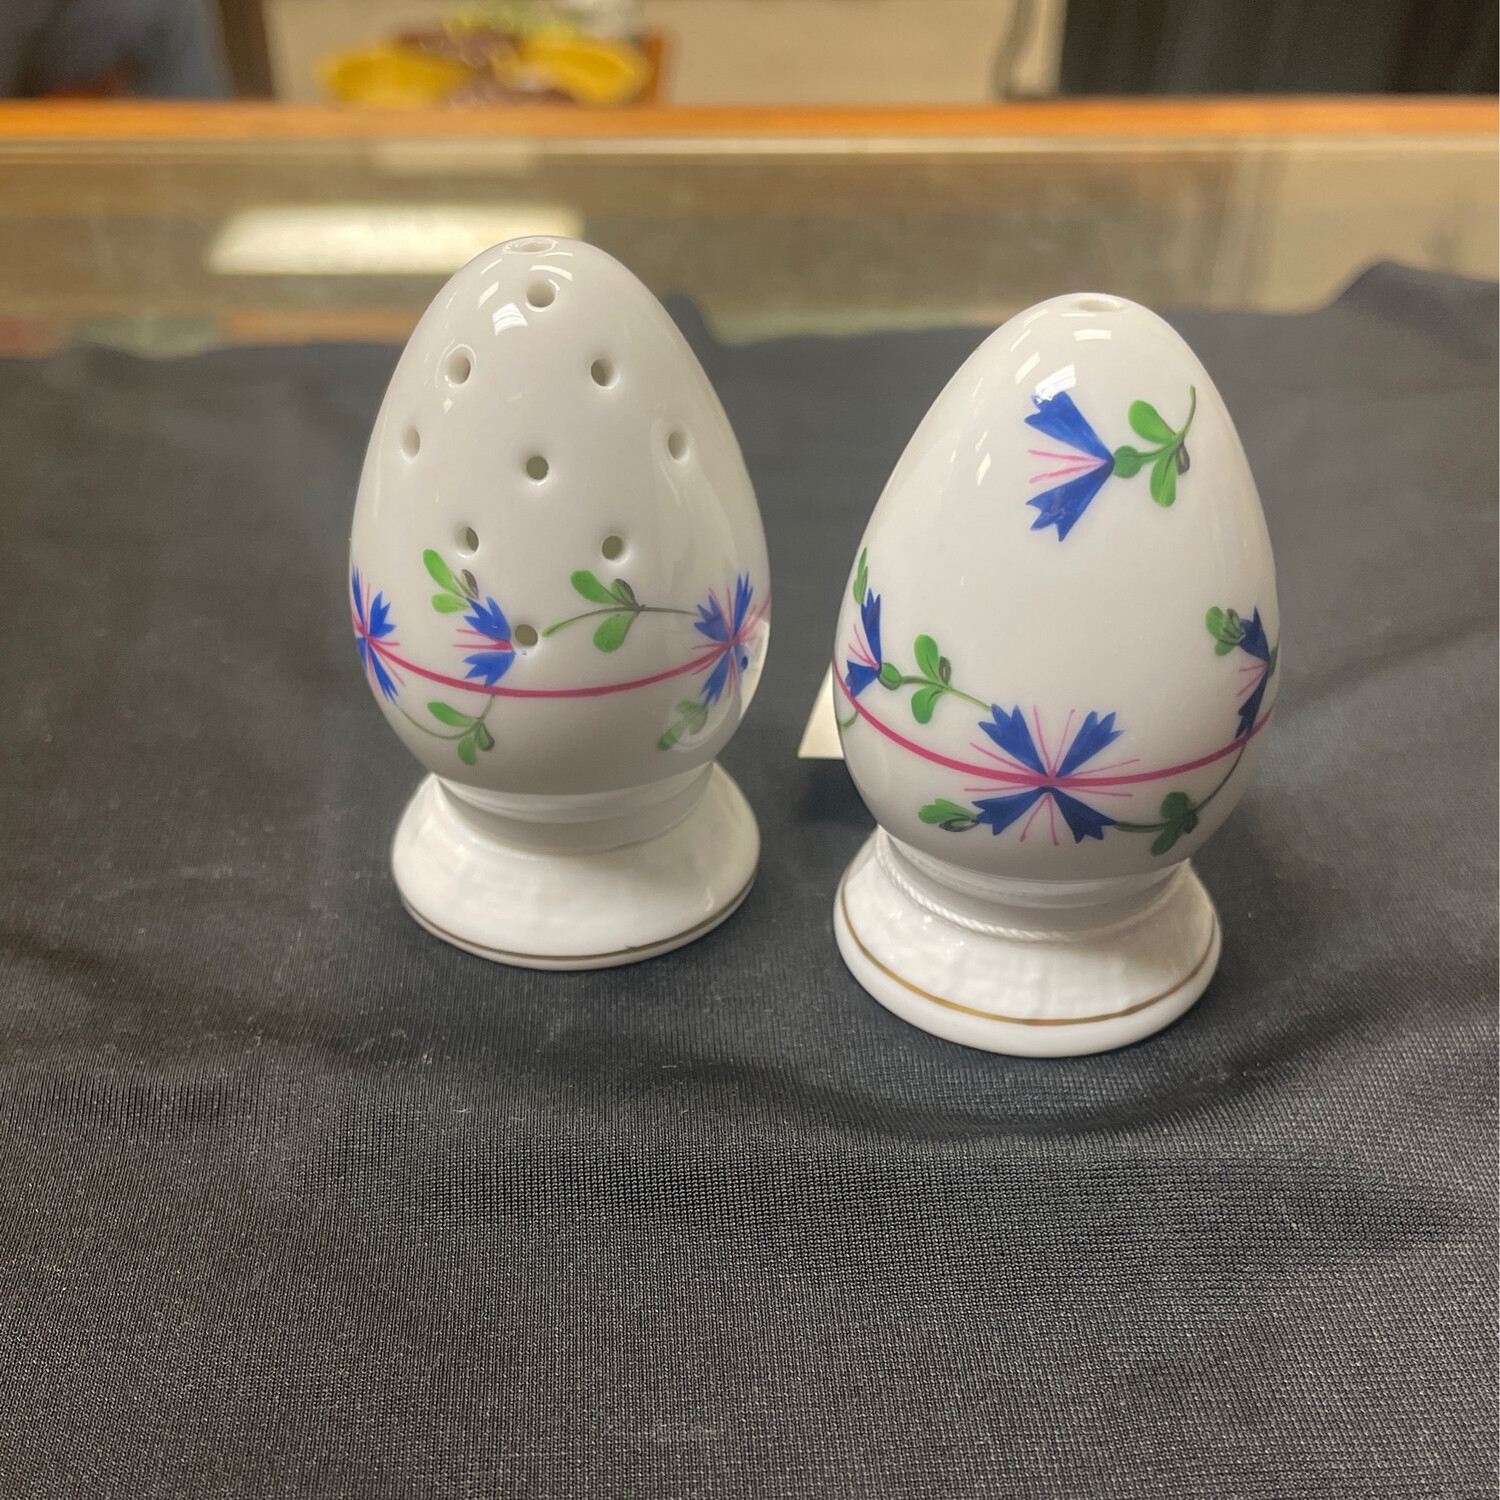 Herend Blue Garland Salt and Pepper Shakers